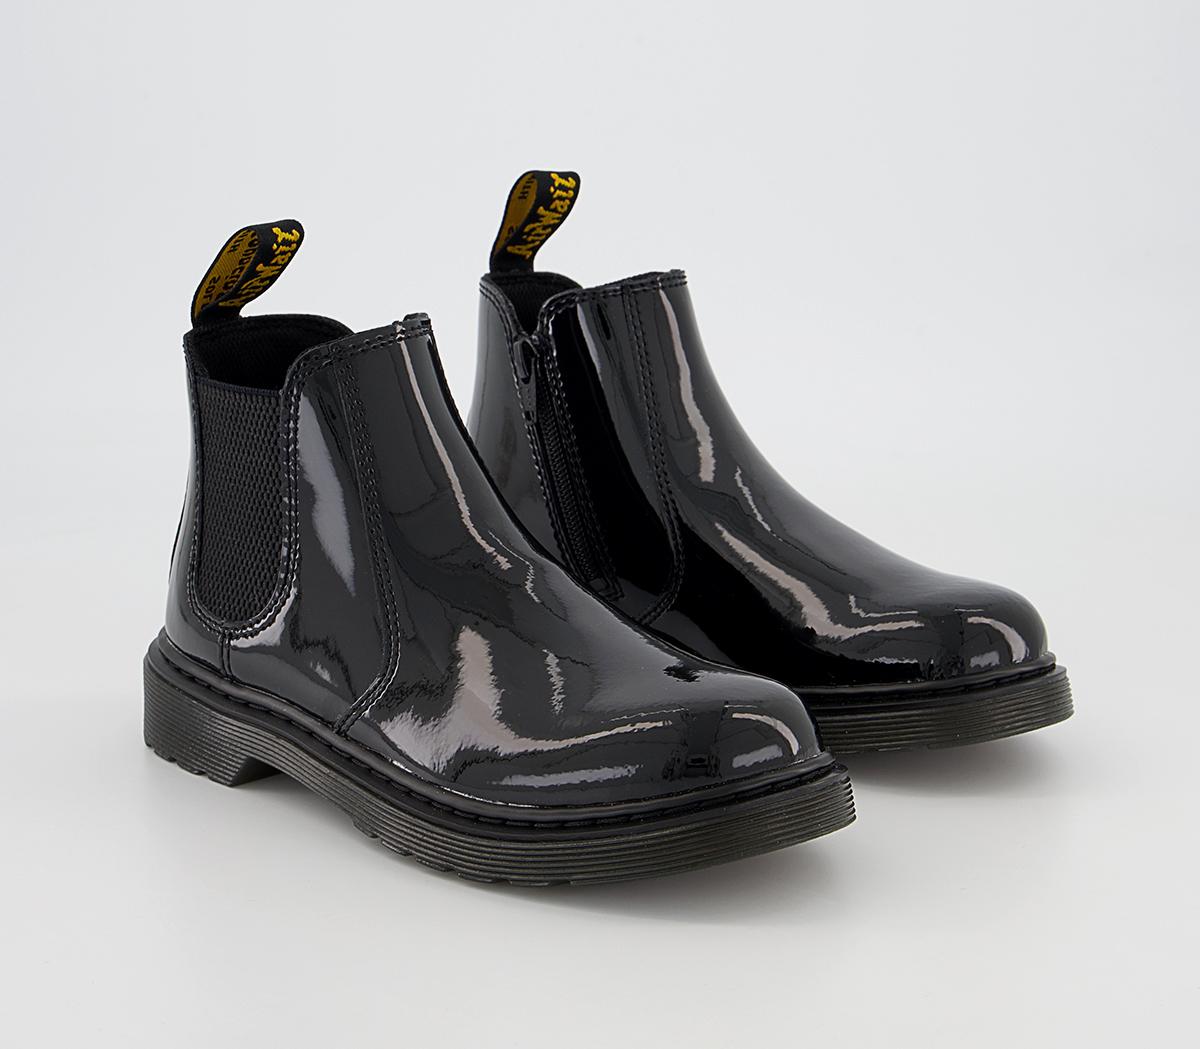 Dr. Martens 2976 Junior Chelsea Boots Black Patent, 1 Youth